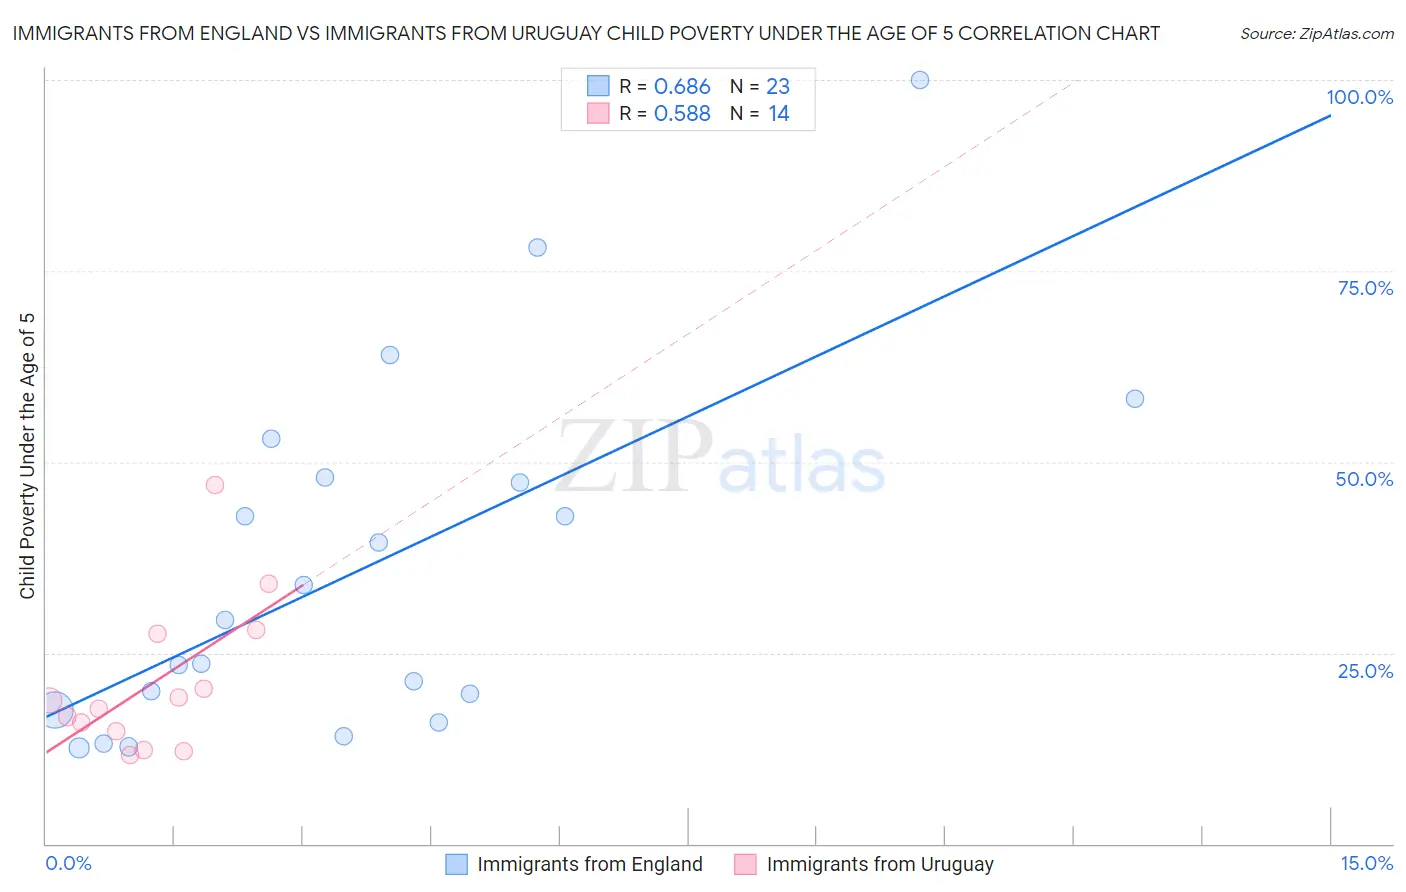 Immigrants from England vs Immigrants from Uruguay Child Poverty Under the Age of 5